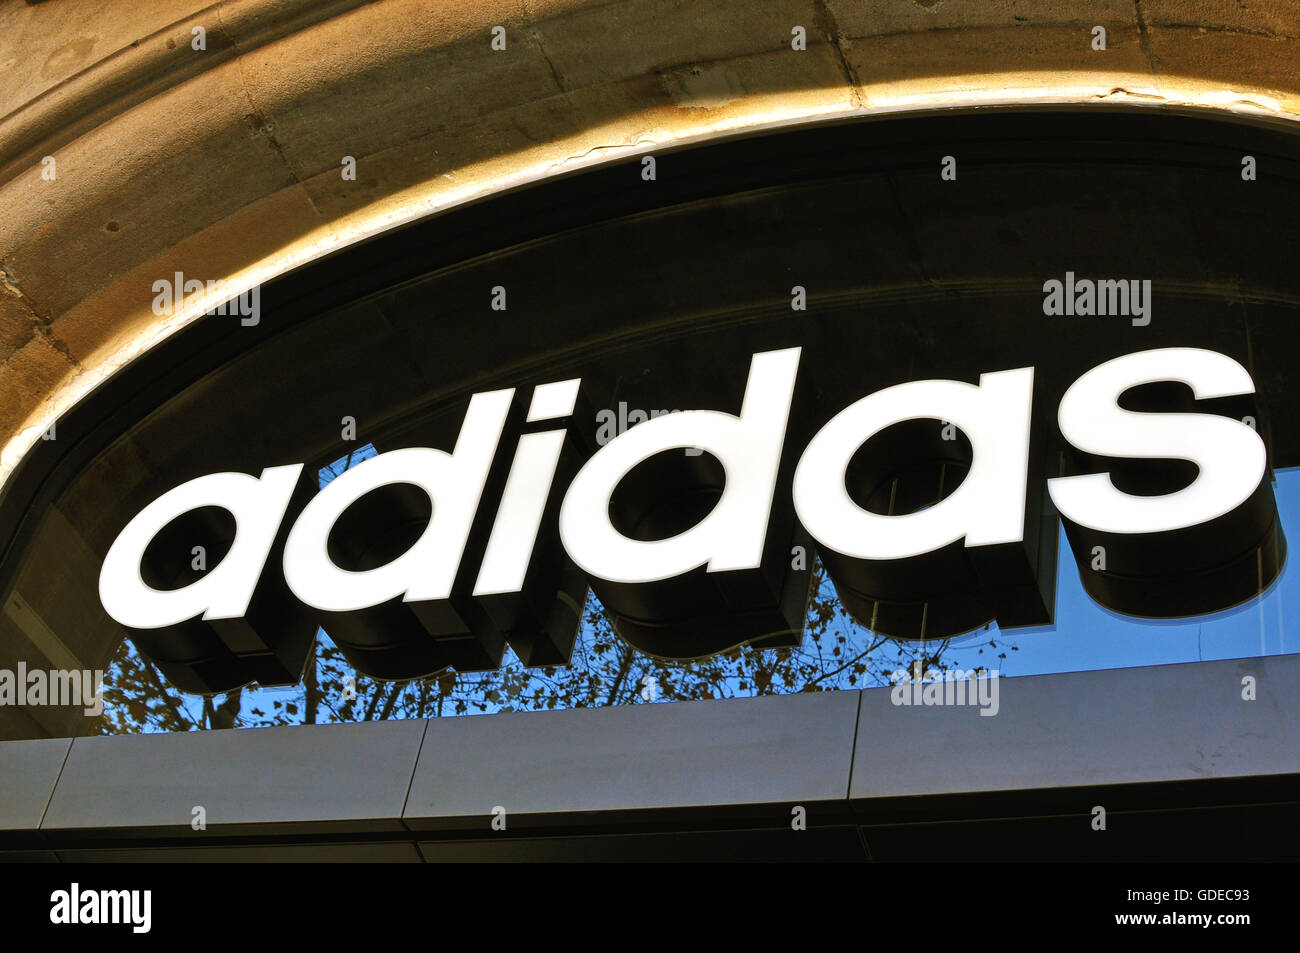 BARCELONA, SPAIN - DECEMBER 21: Logo of Adidas flagship store in the street of Barcelona on December 21, 2014. Stock Photo